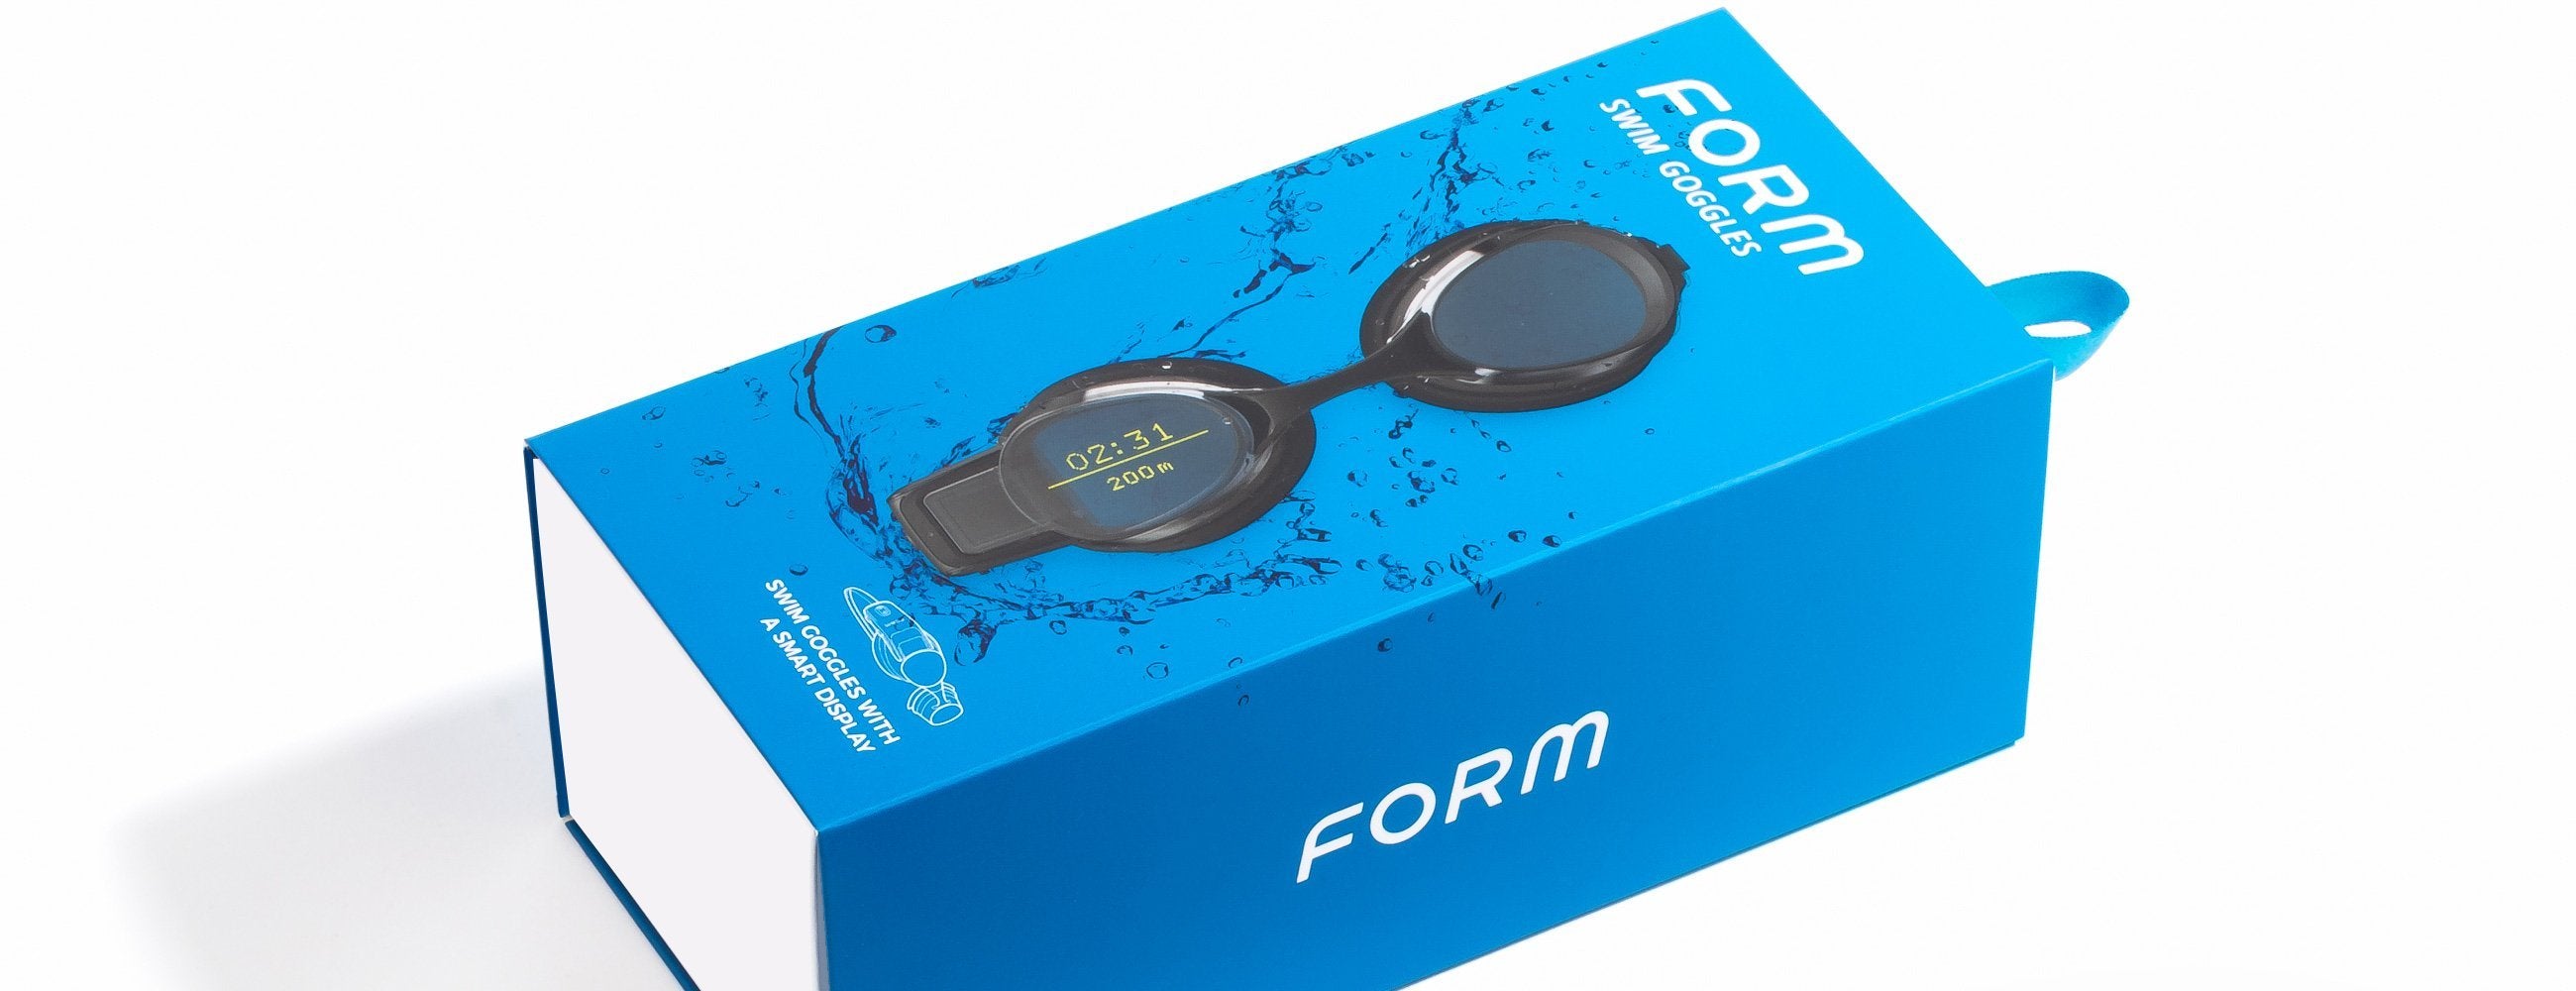 FORM Smart Swim Goggles with Augmented-Reality Display Available Today for $199